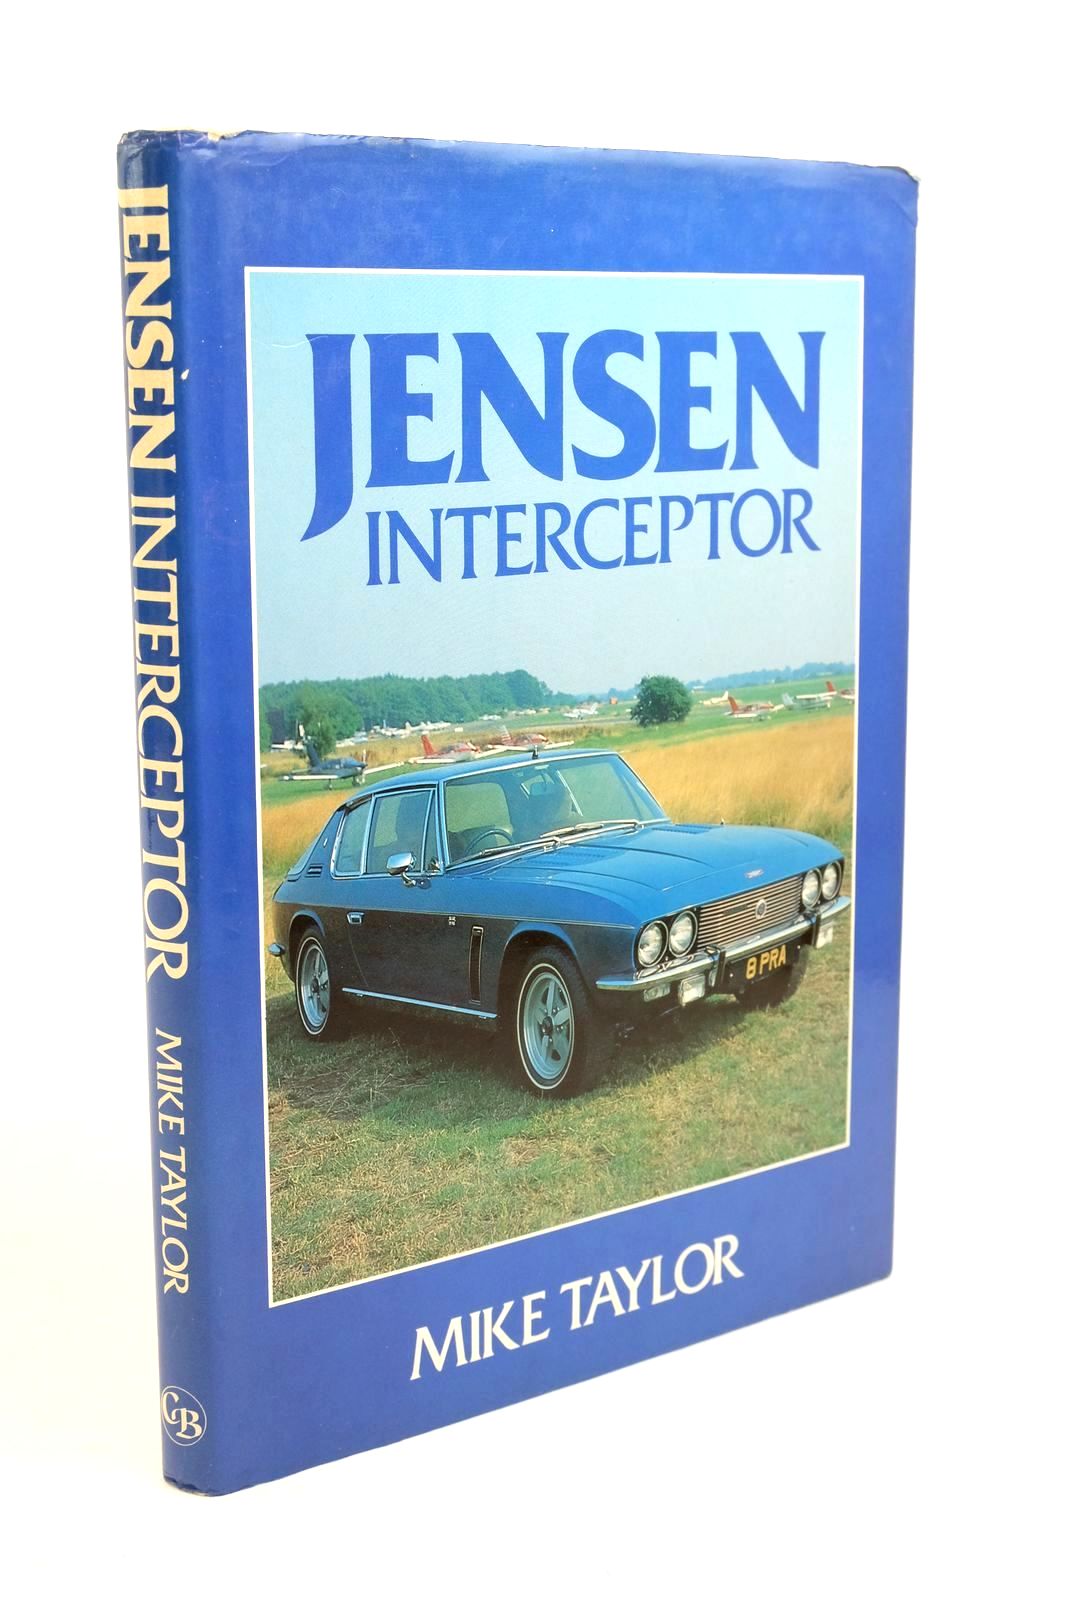 Photo of JENSEN INTERCEPTOR written by Taylor, Mike published by Cadogan Books (STOCK CODE: 1321238)  for sale by Stella & Rose's Books